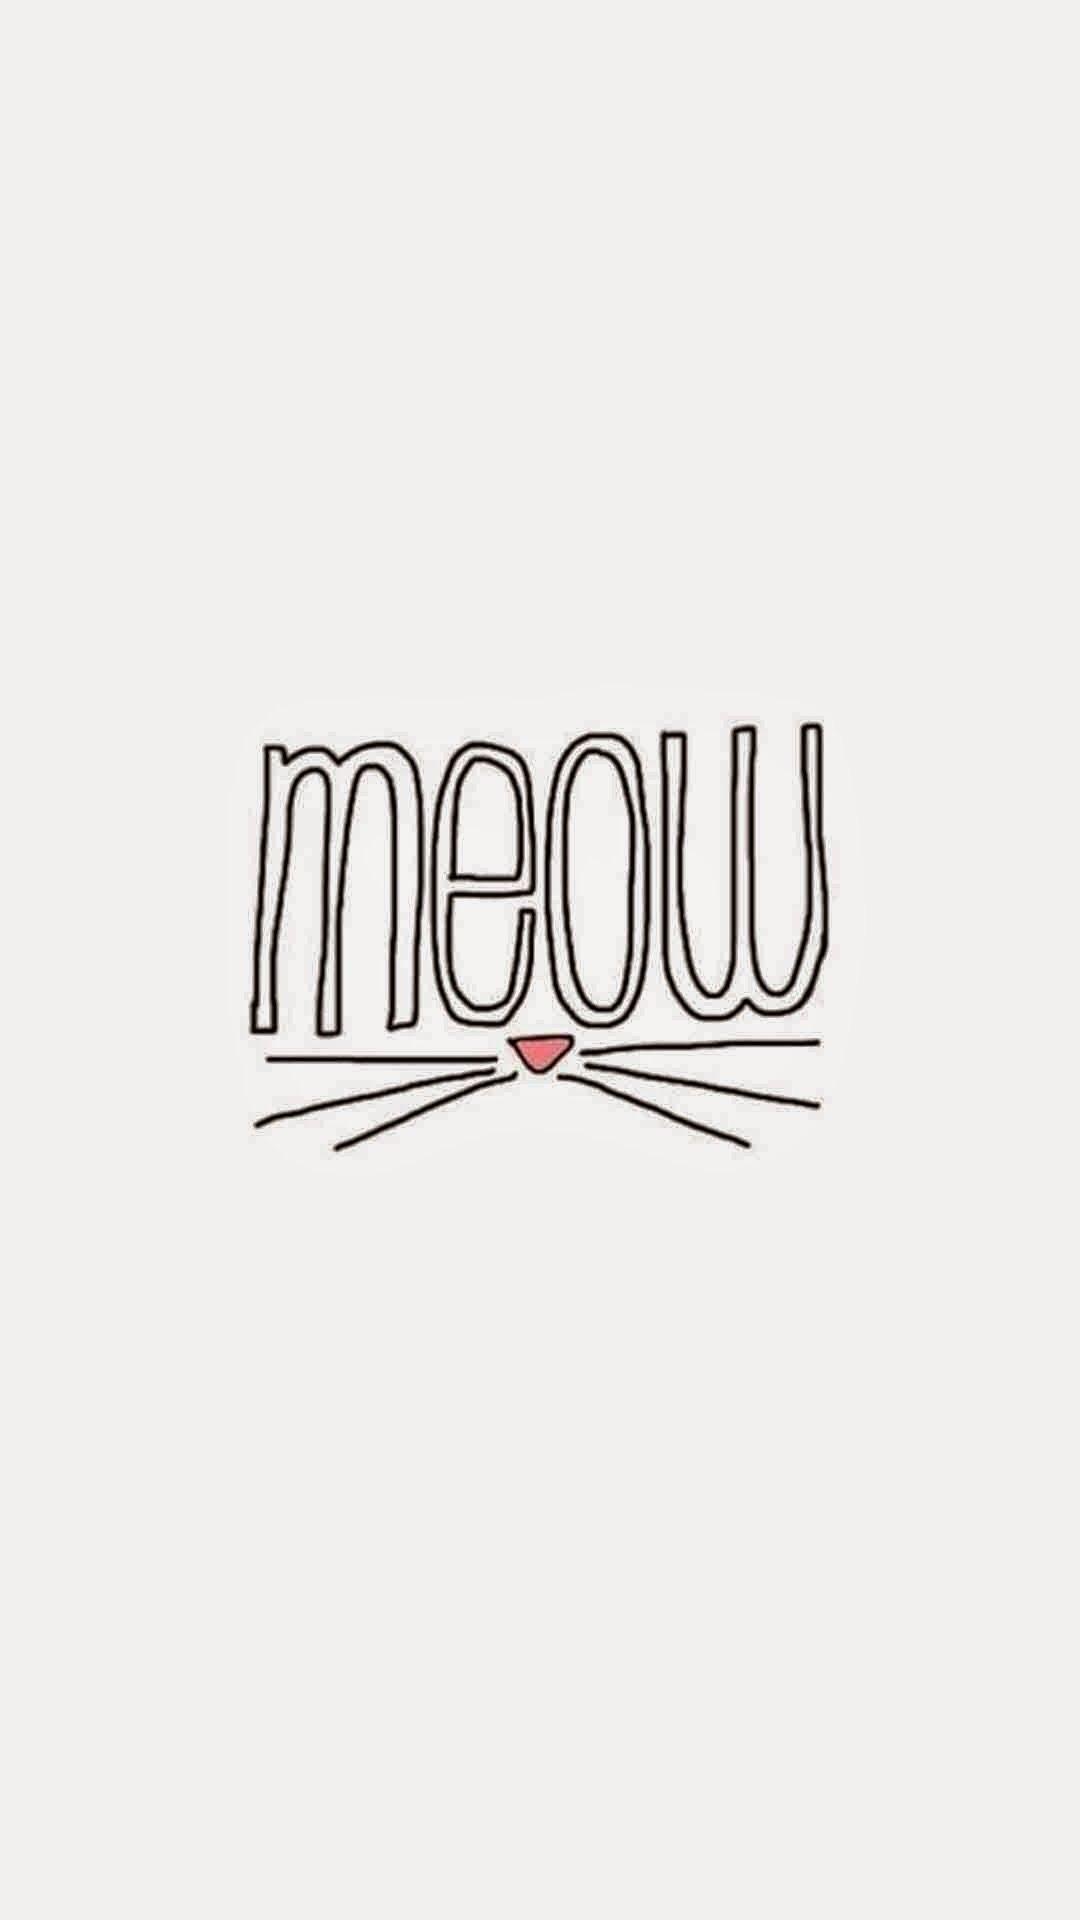 Meow ★ Find more inspirational wallpaper for your #iPhone +